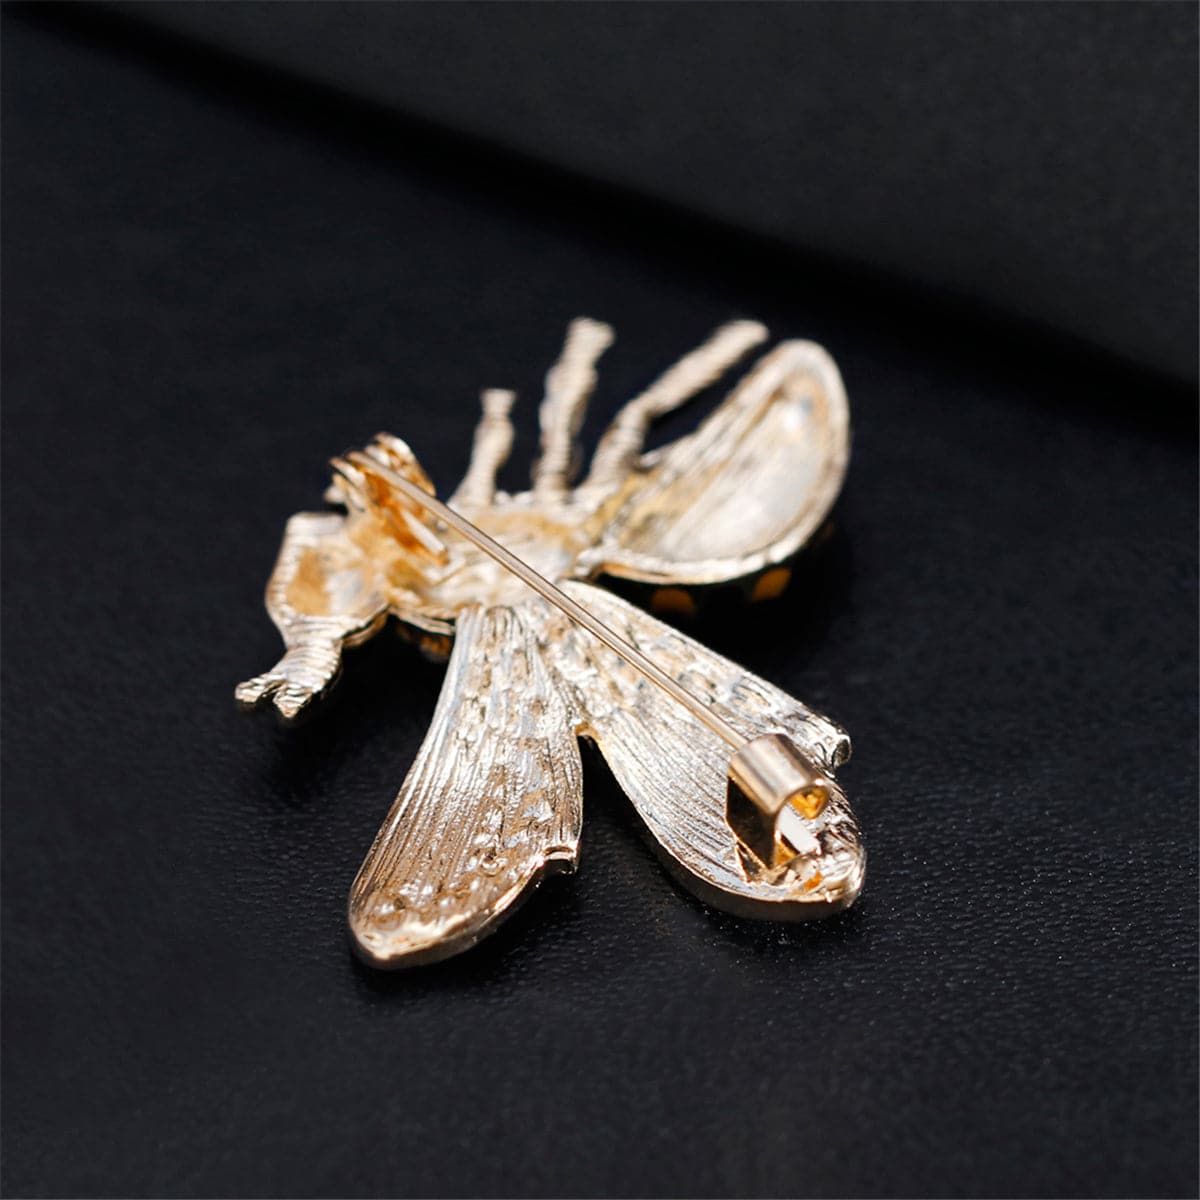 Cubic Zirconia & 18K Gold-Plated Bee Brooch